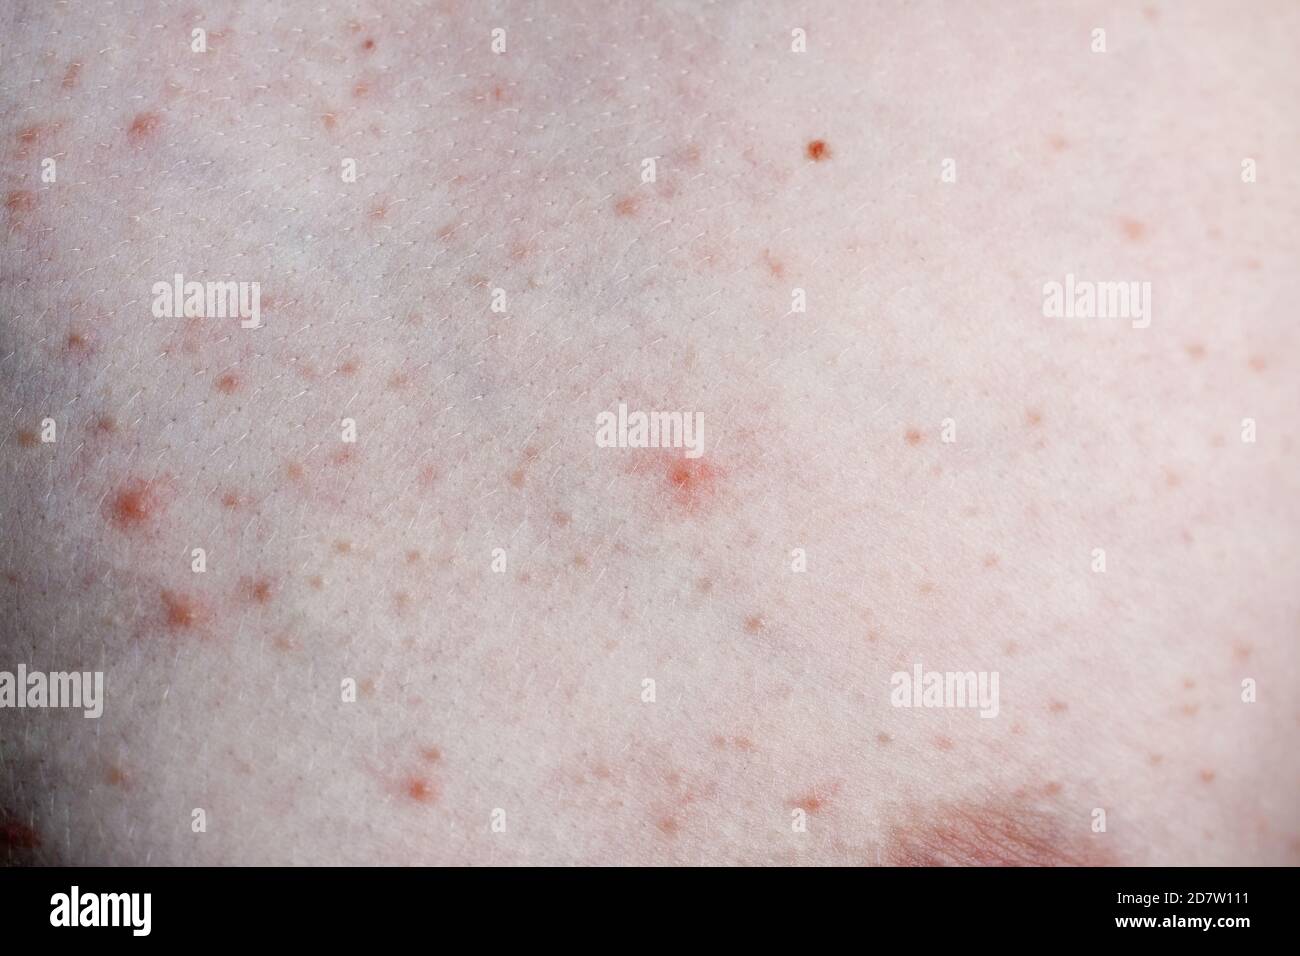 Close up image of a little boy's body suffering severe urticaria, nettle rash also called hives. Stock Photo